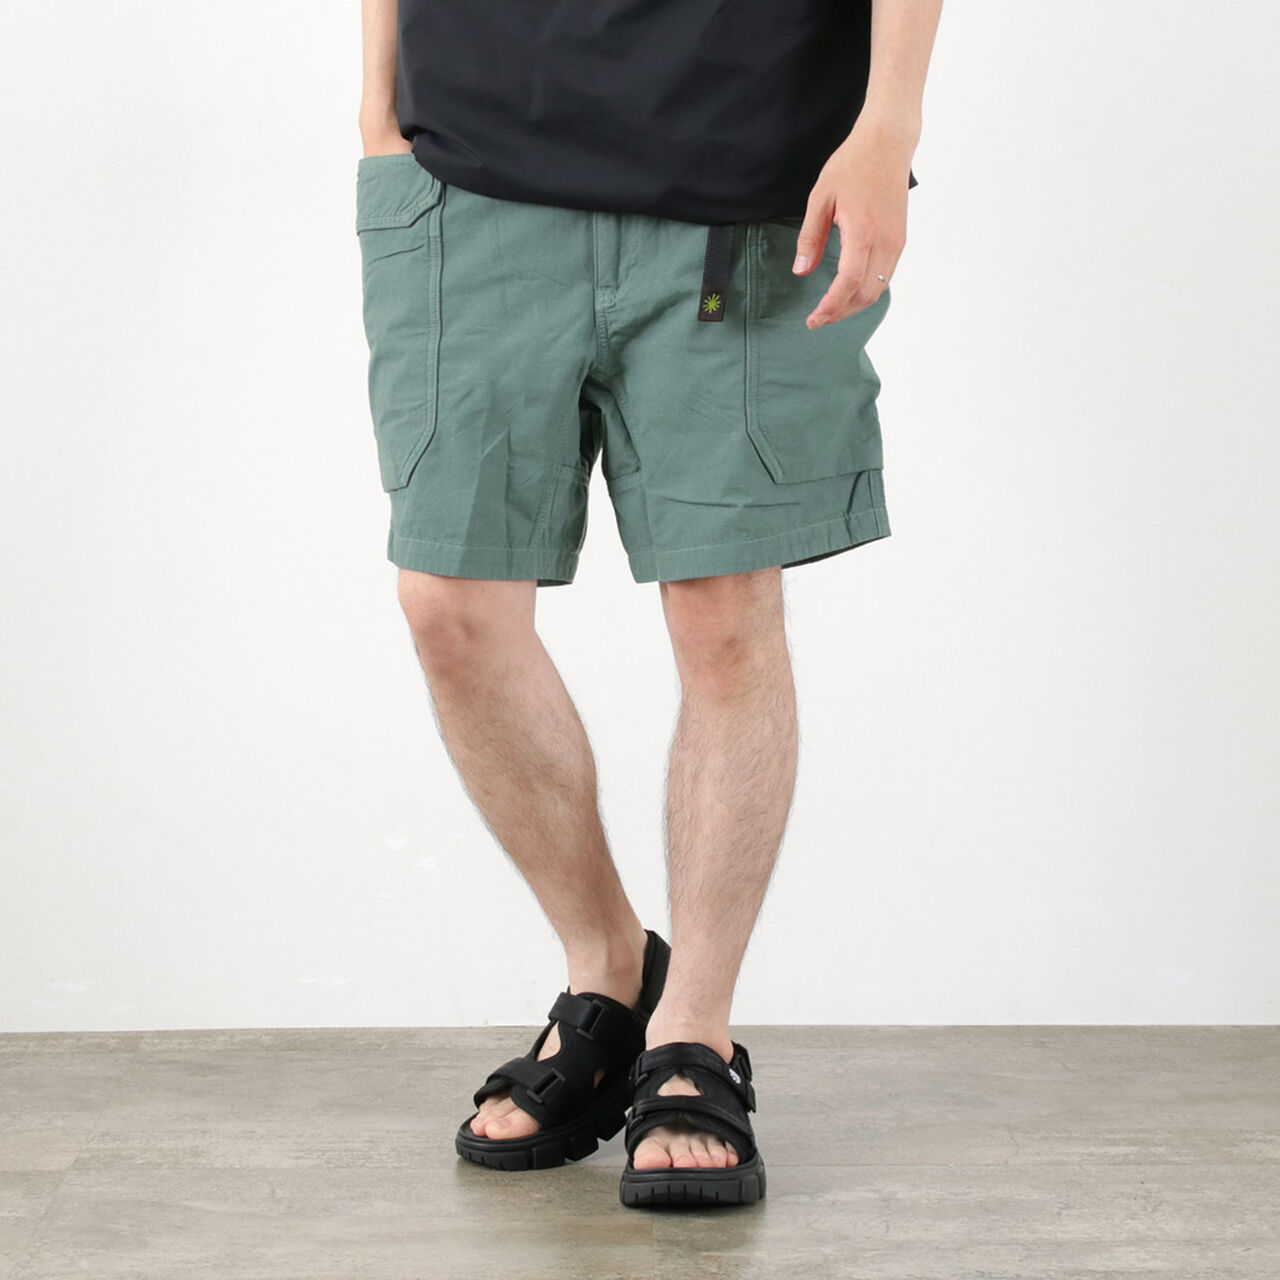 Ultimate Shorts Hemp Cotton Recycled Polyester Weather Cloth,JadeGreen, large image number 0